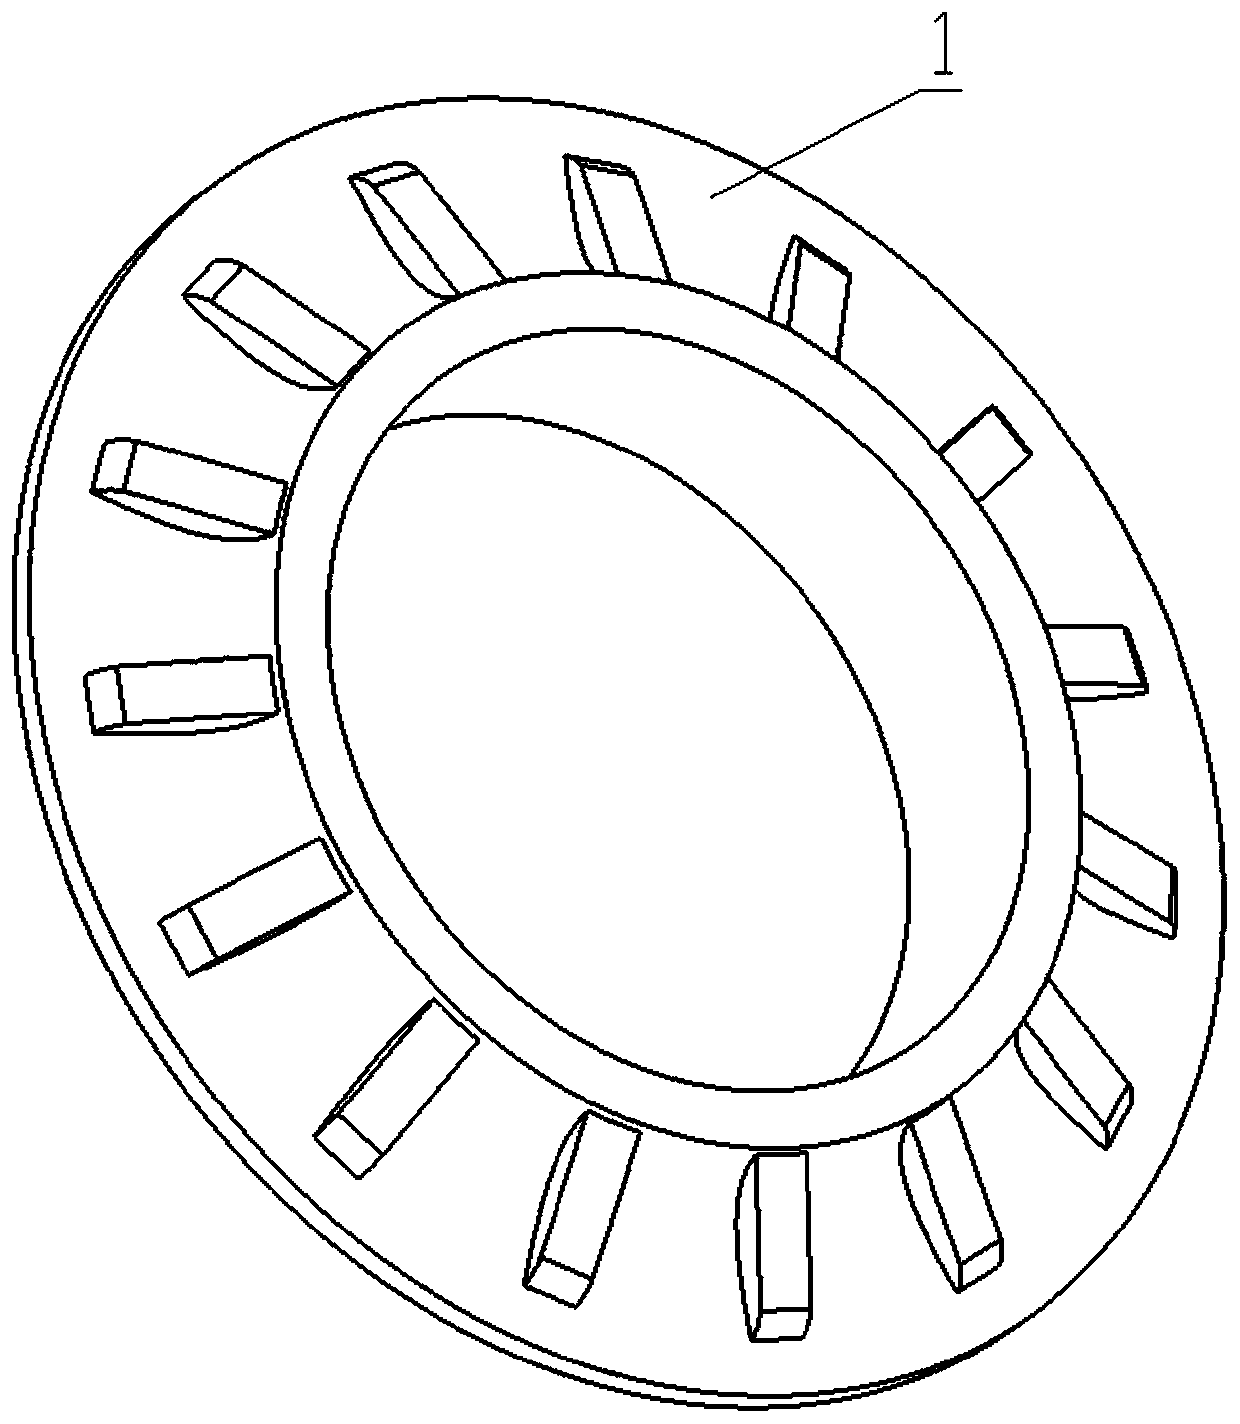 TBM disk-shaped hobbing cutter additionally provided with reinforcement ribs on side face of cutter ring